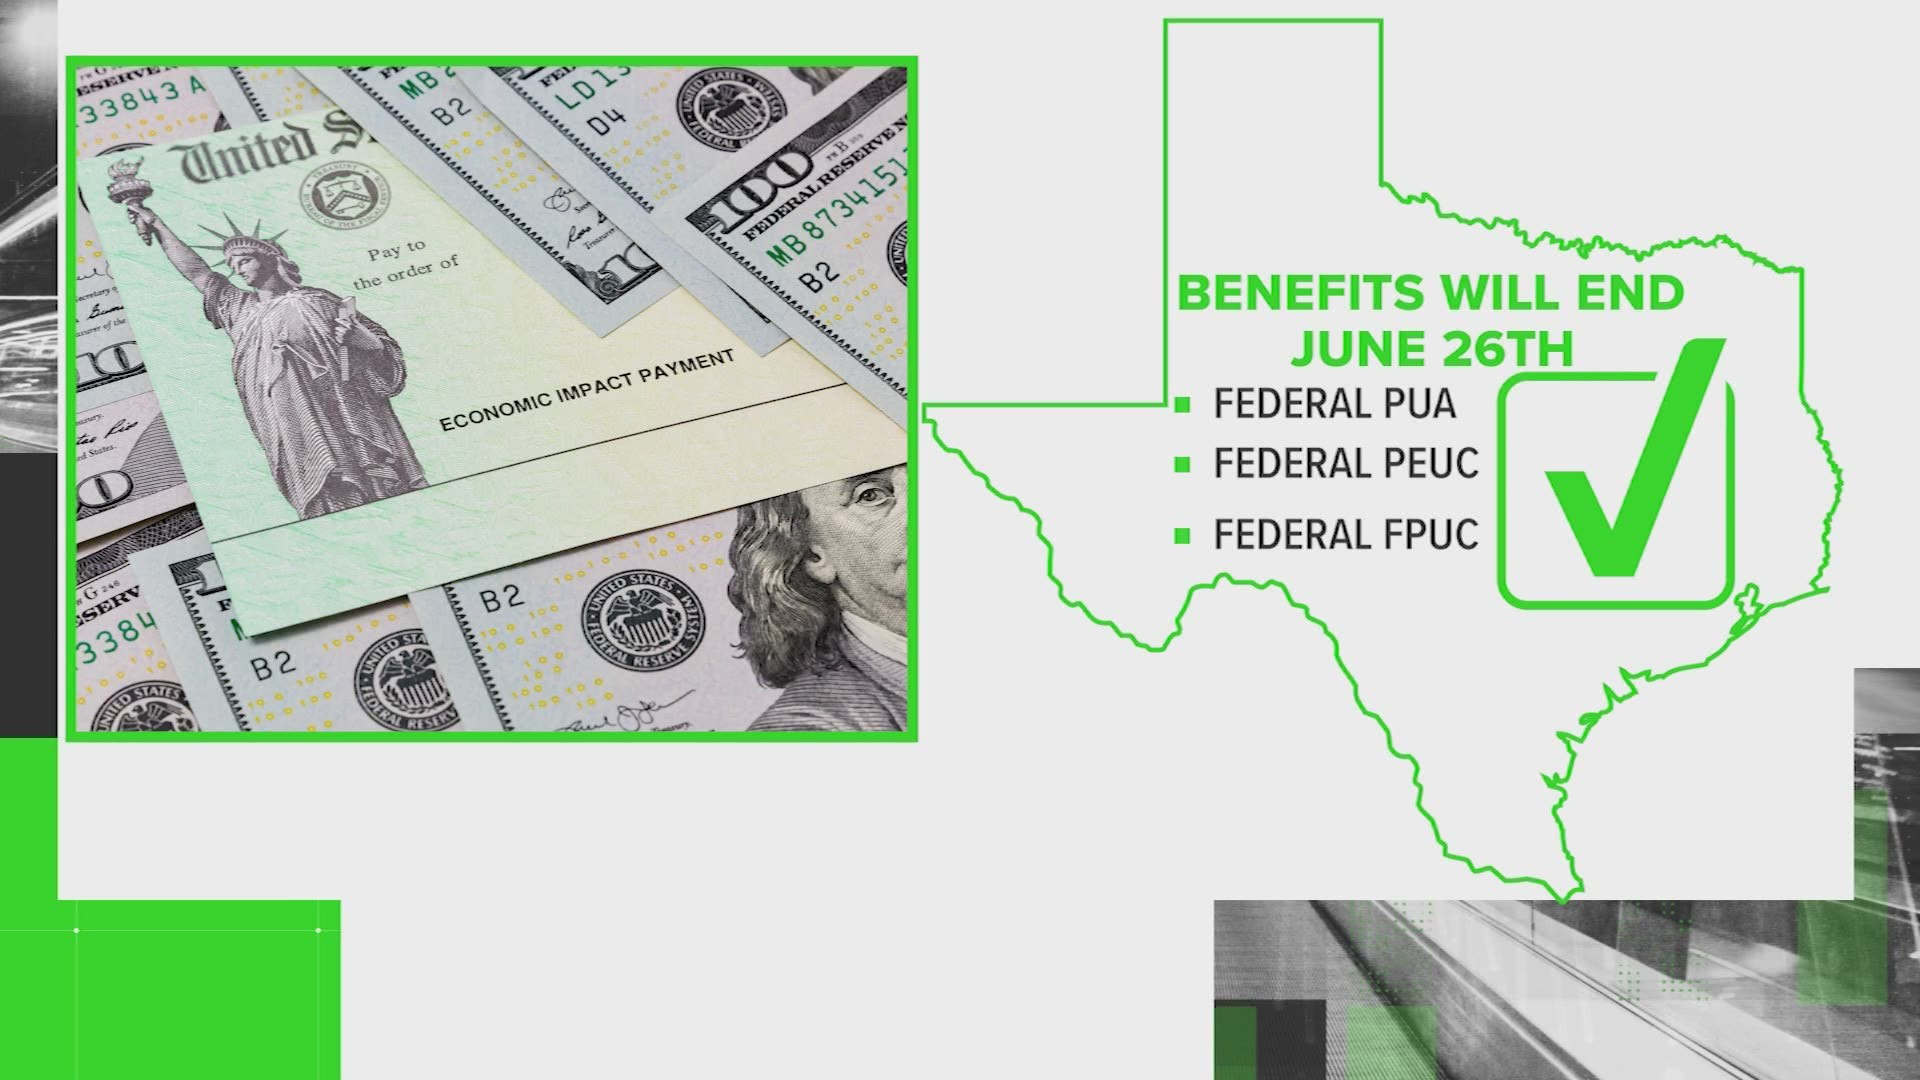 Texas Workforce Commission says regular state benefits will continue for eligible Texans.